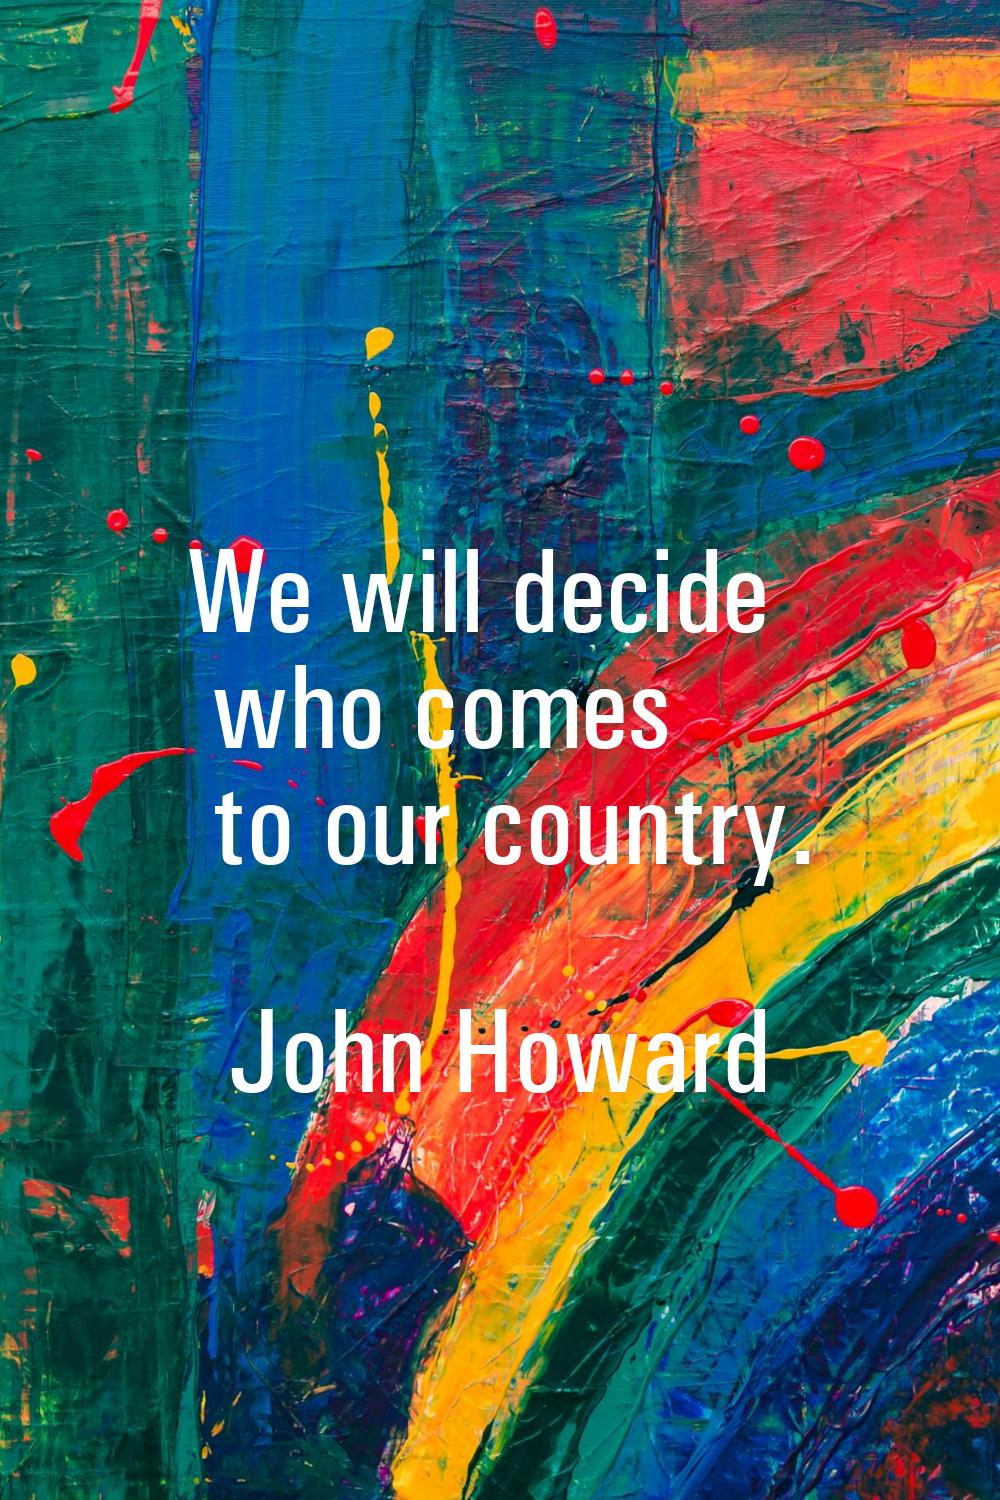 We will decide who comes to our country.